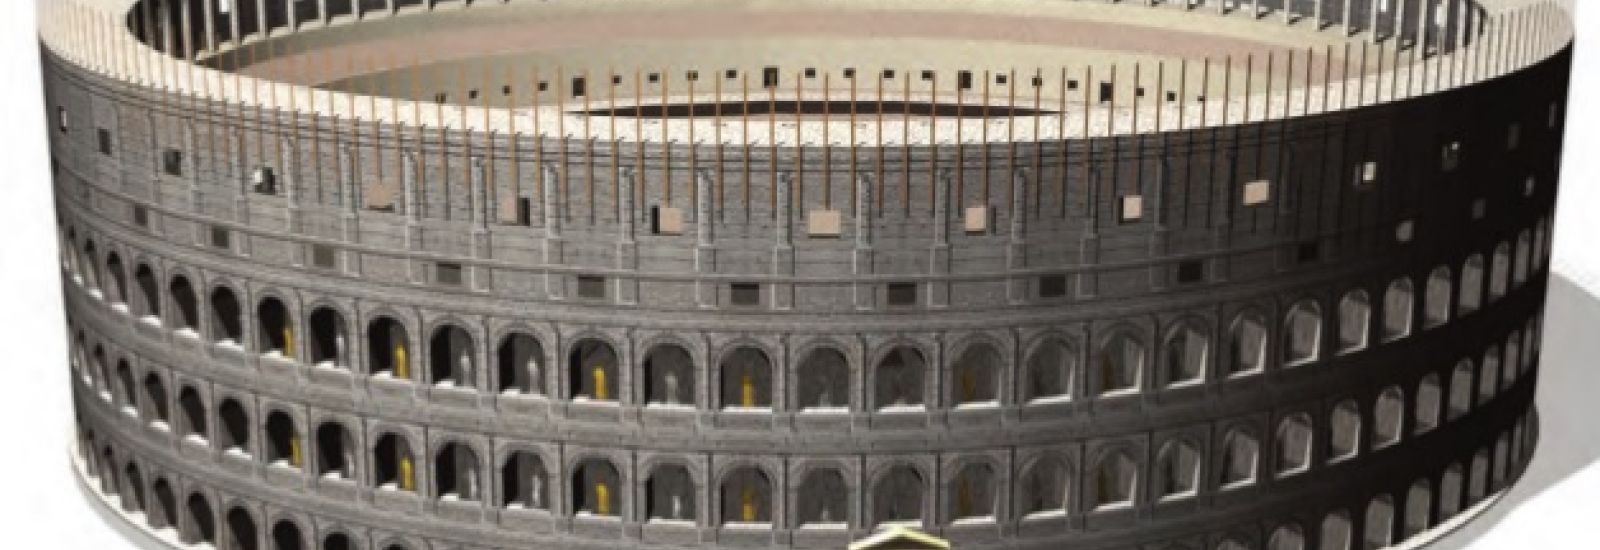 A CGI image of the Colosseum in Rome